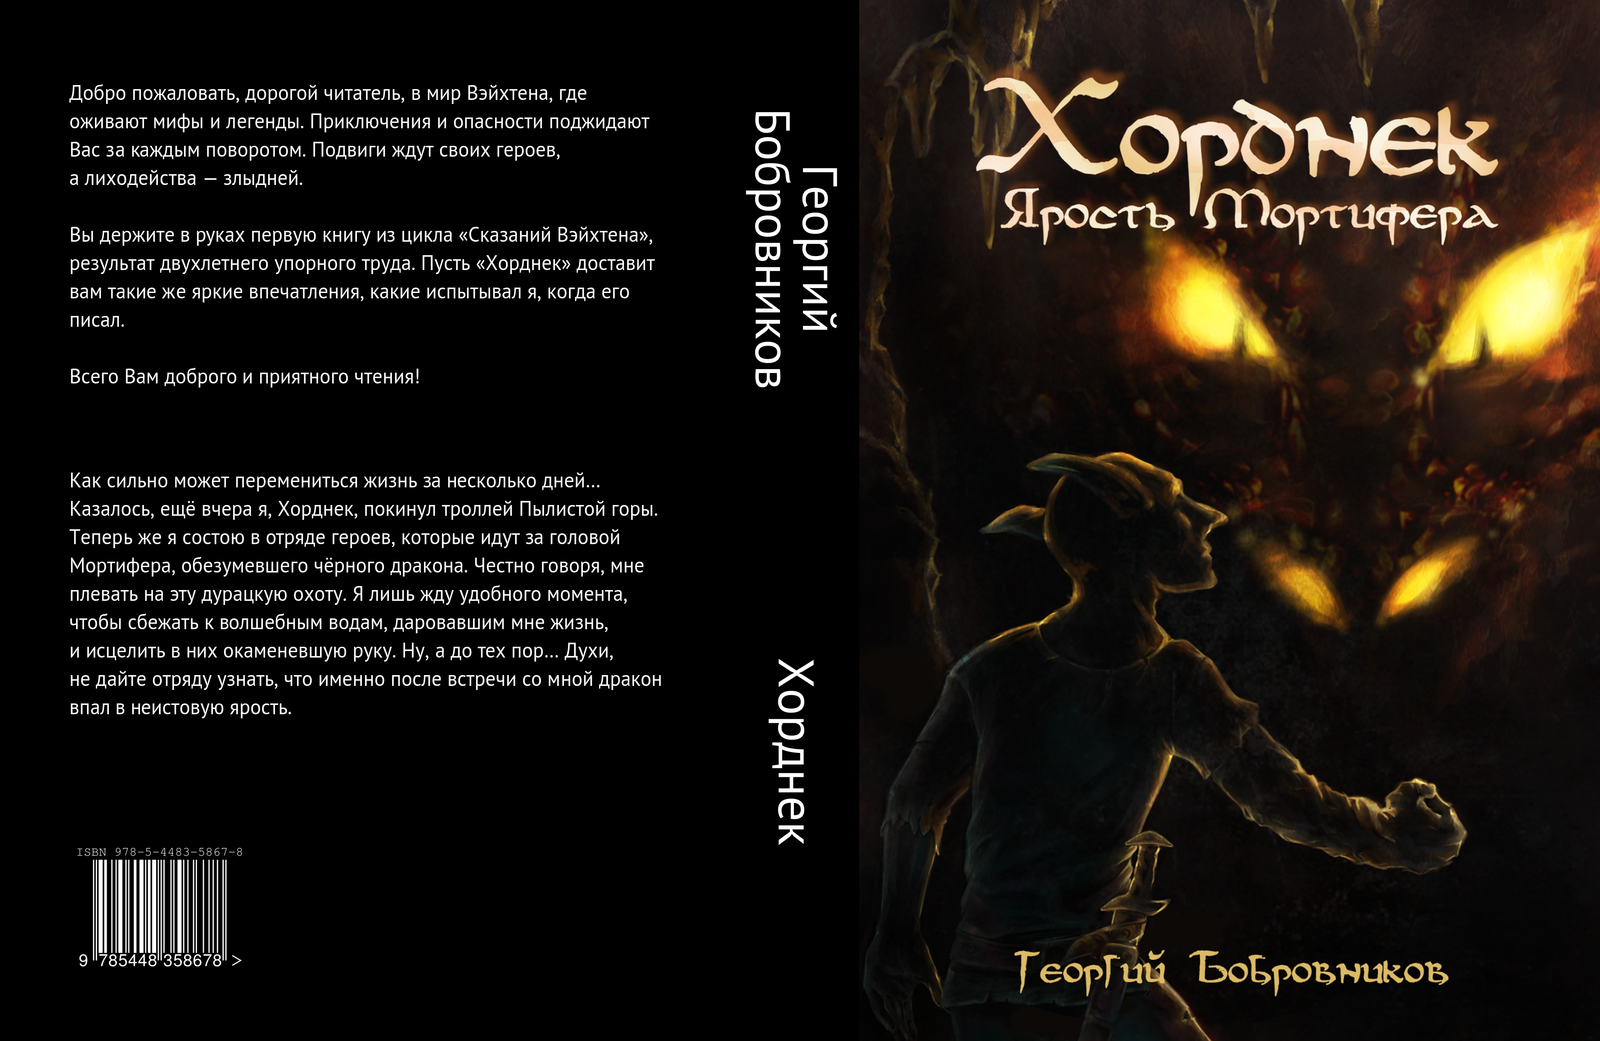 My book came out yesterday - Adventures, The Dragon, Books, Literature, Creation, Fantasy, Chordnek, My